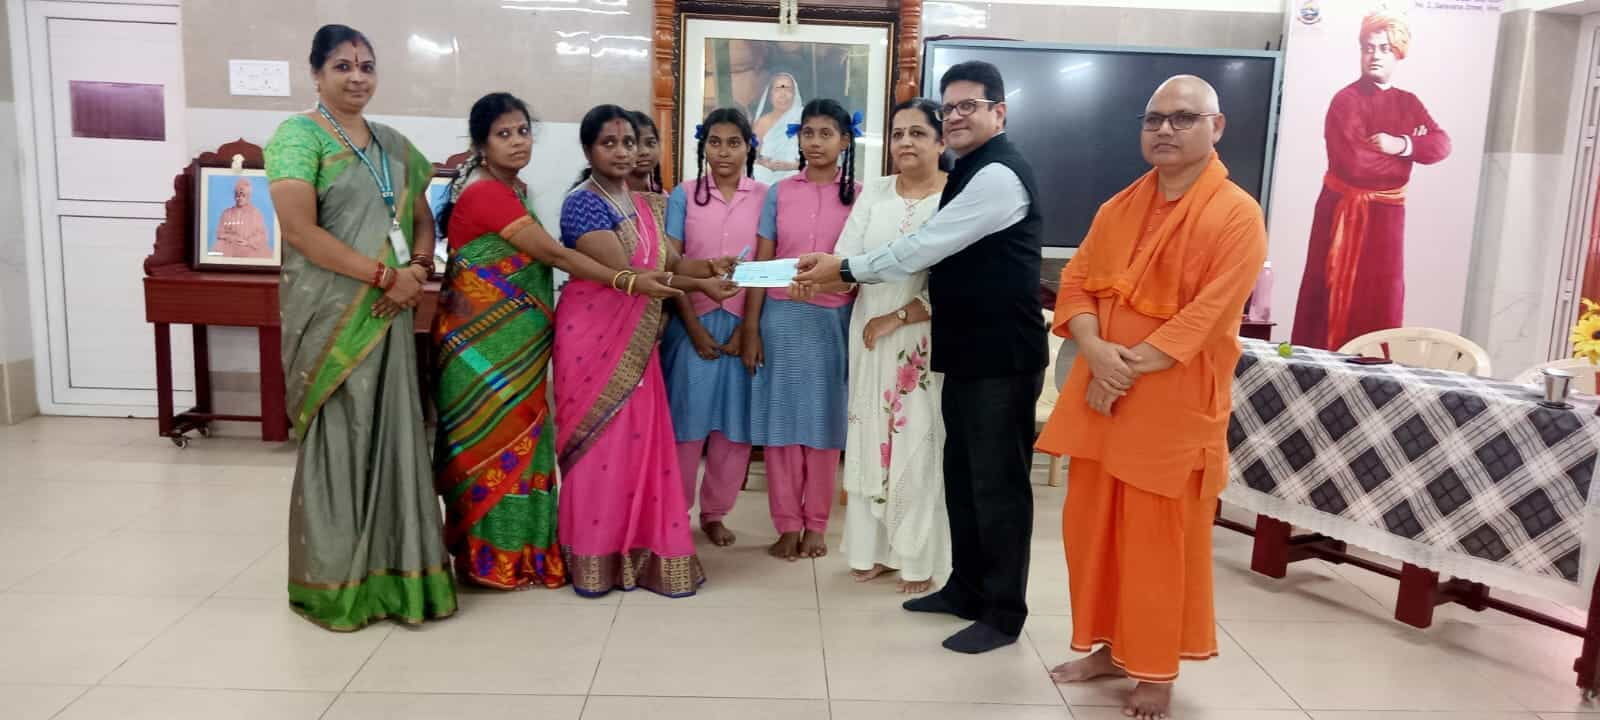 CPCL Fees donated for students